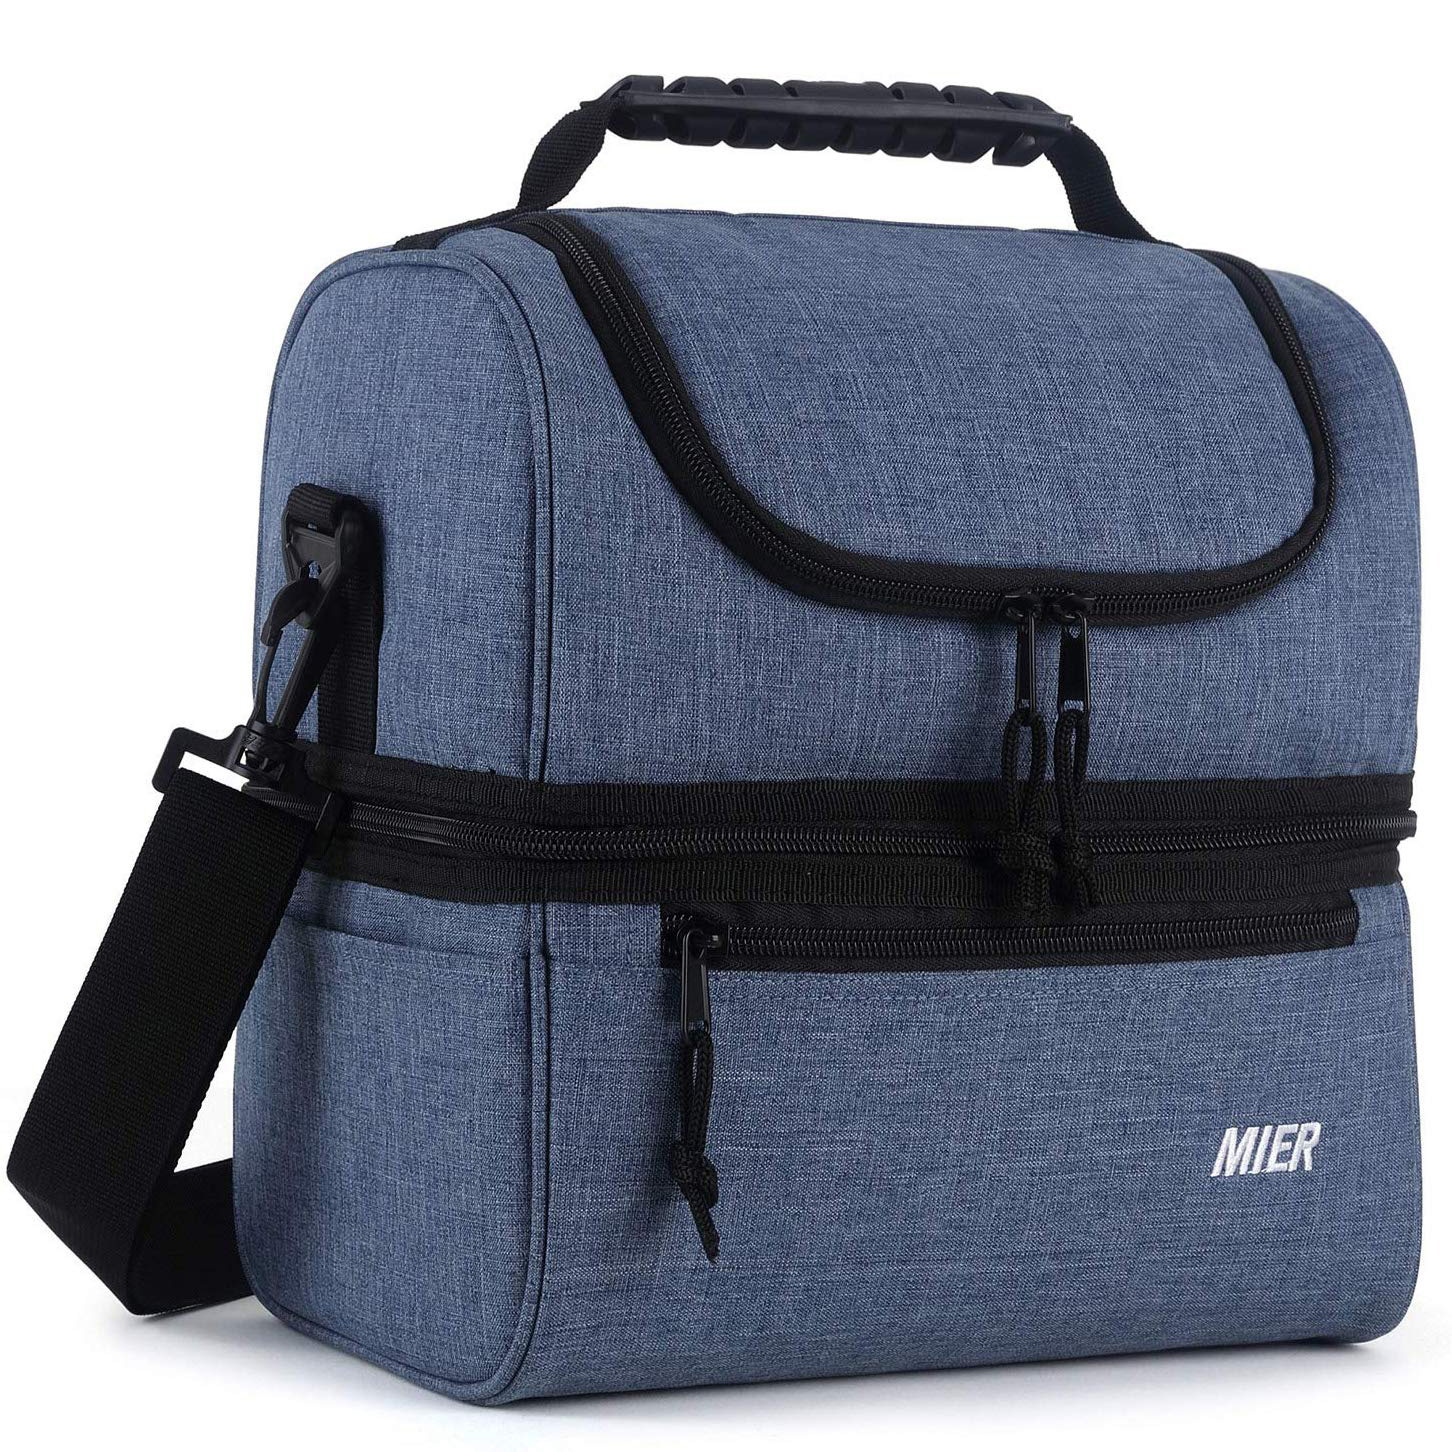 MIER Adult Insulated Lunch Bag Large Cooler Tote Bag